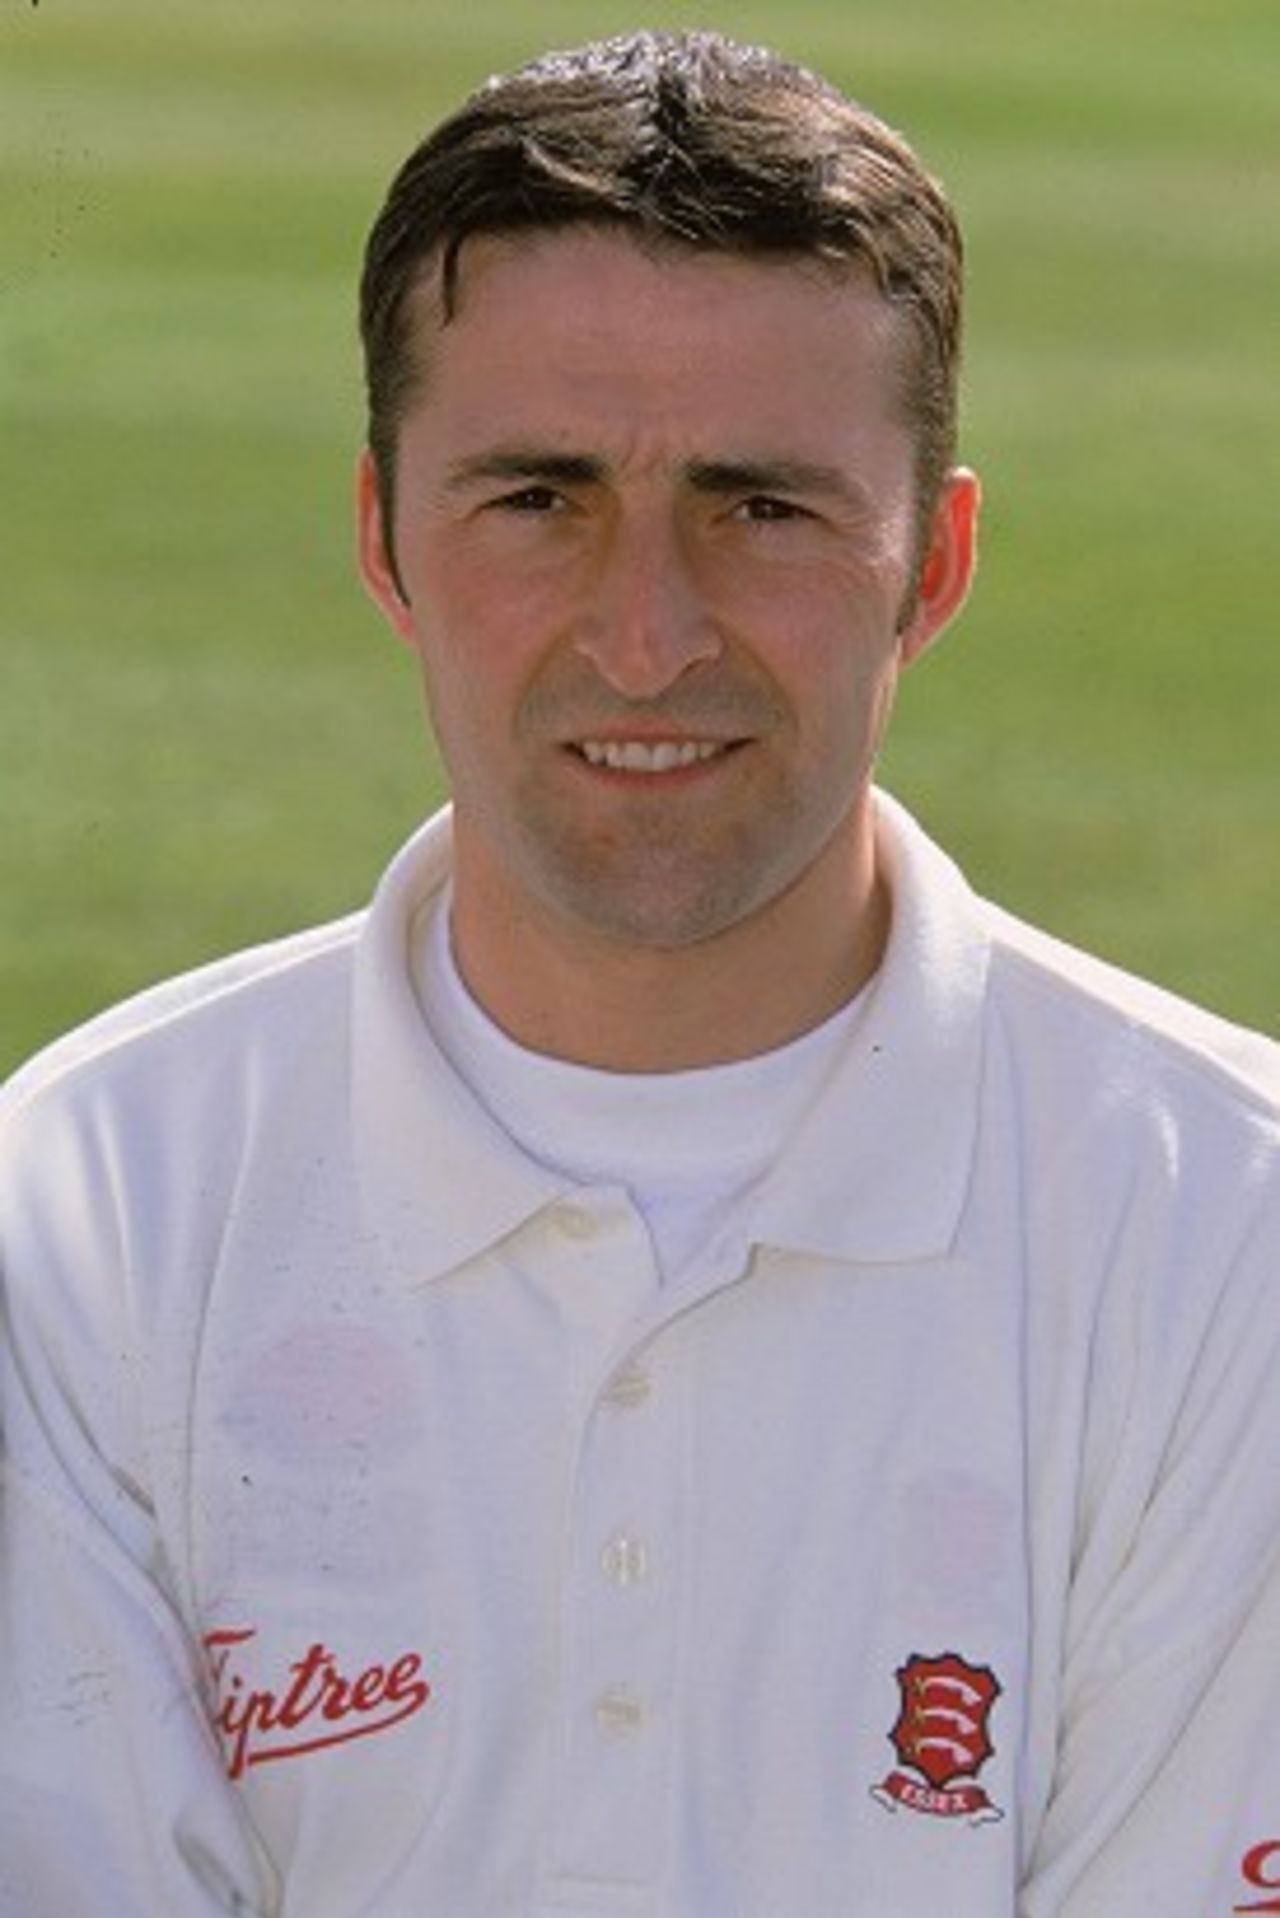 10 Apr 2000: Portrait of Paul Grayson taken at an Essex County Cricket Club photocall in Chelmsford, England.